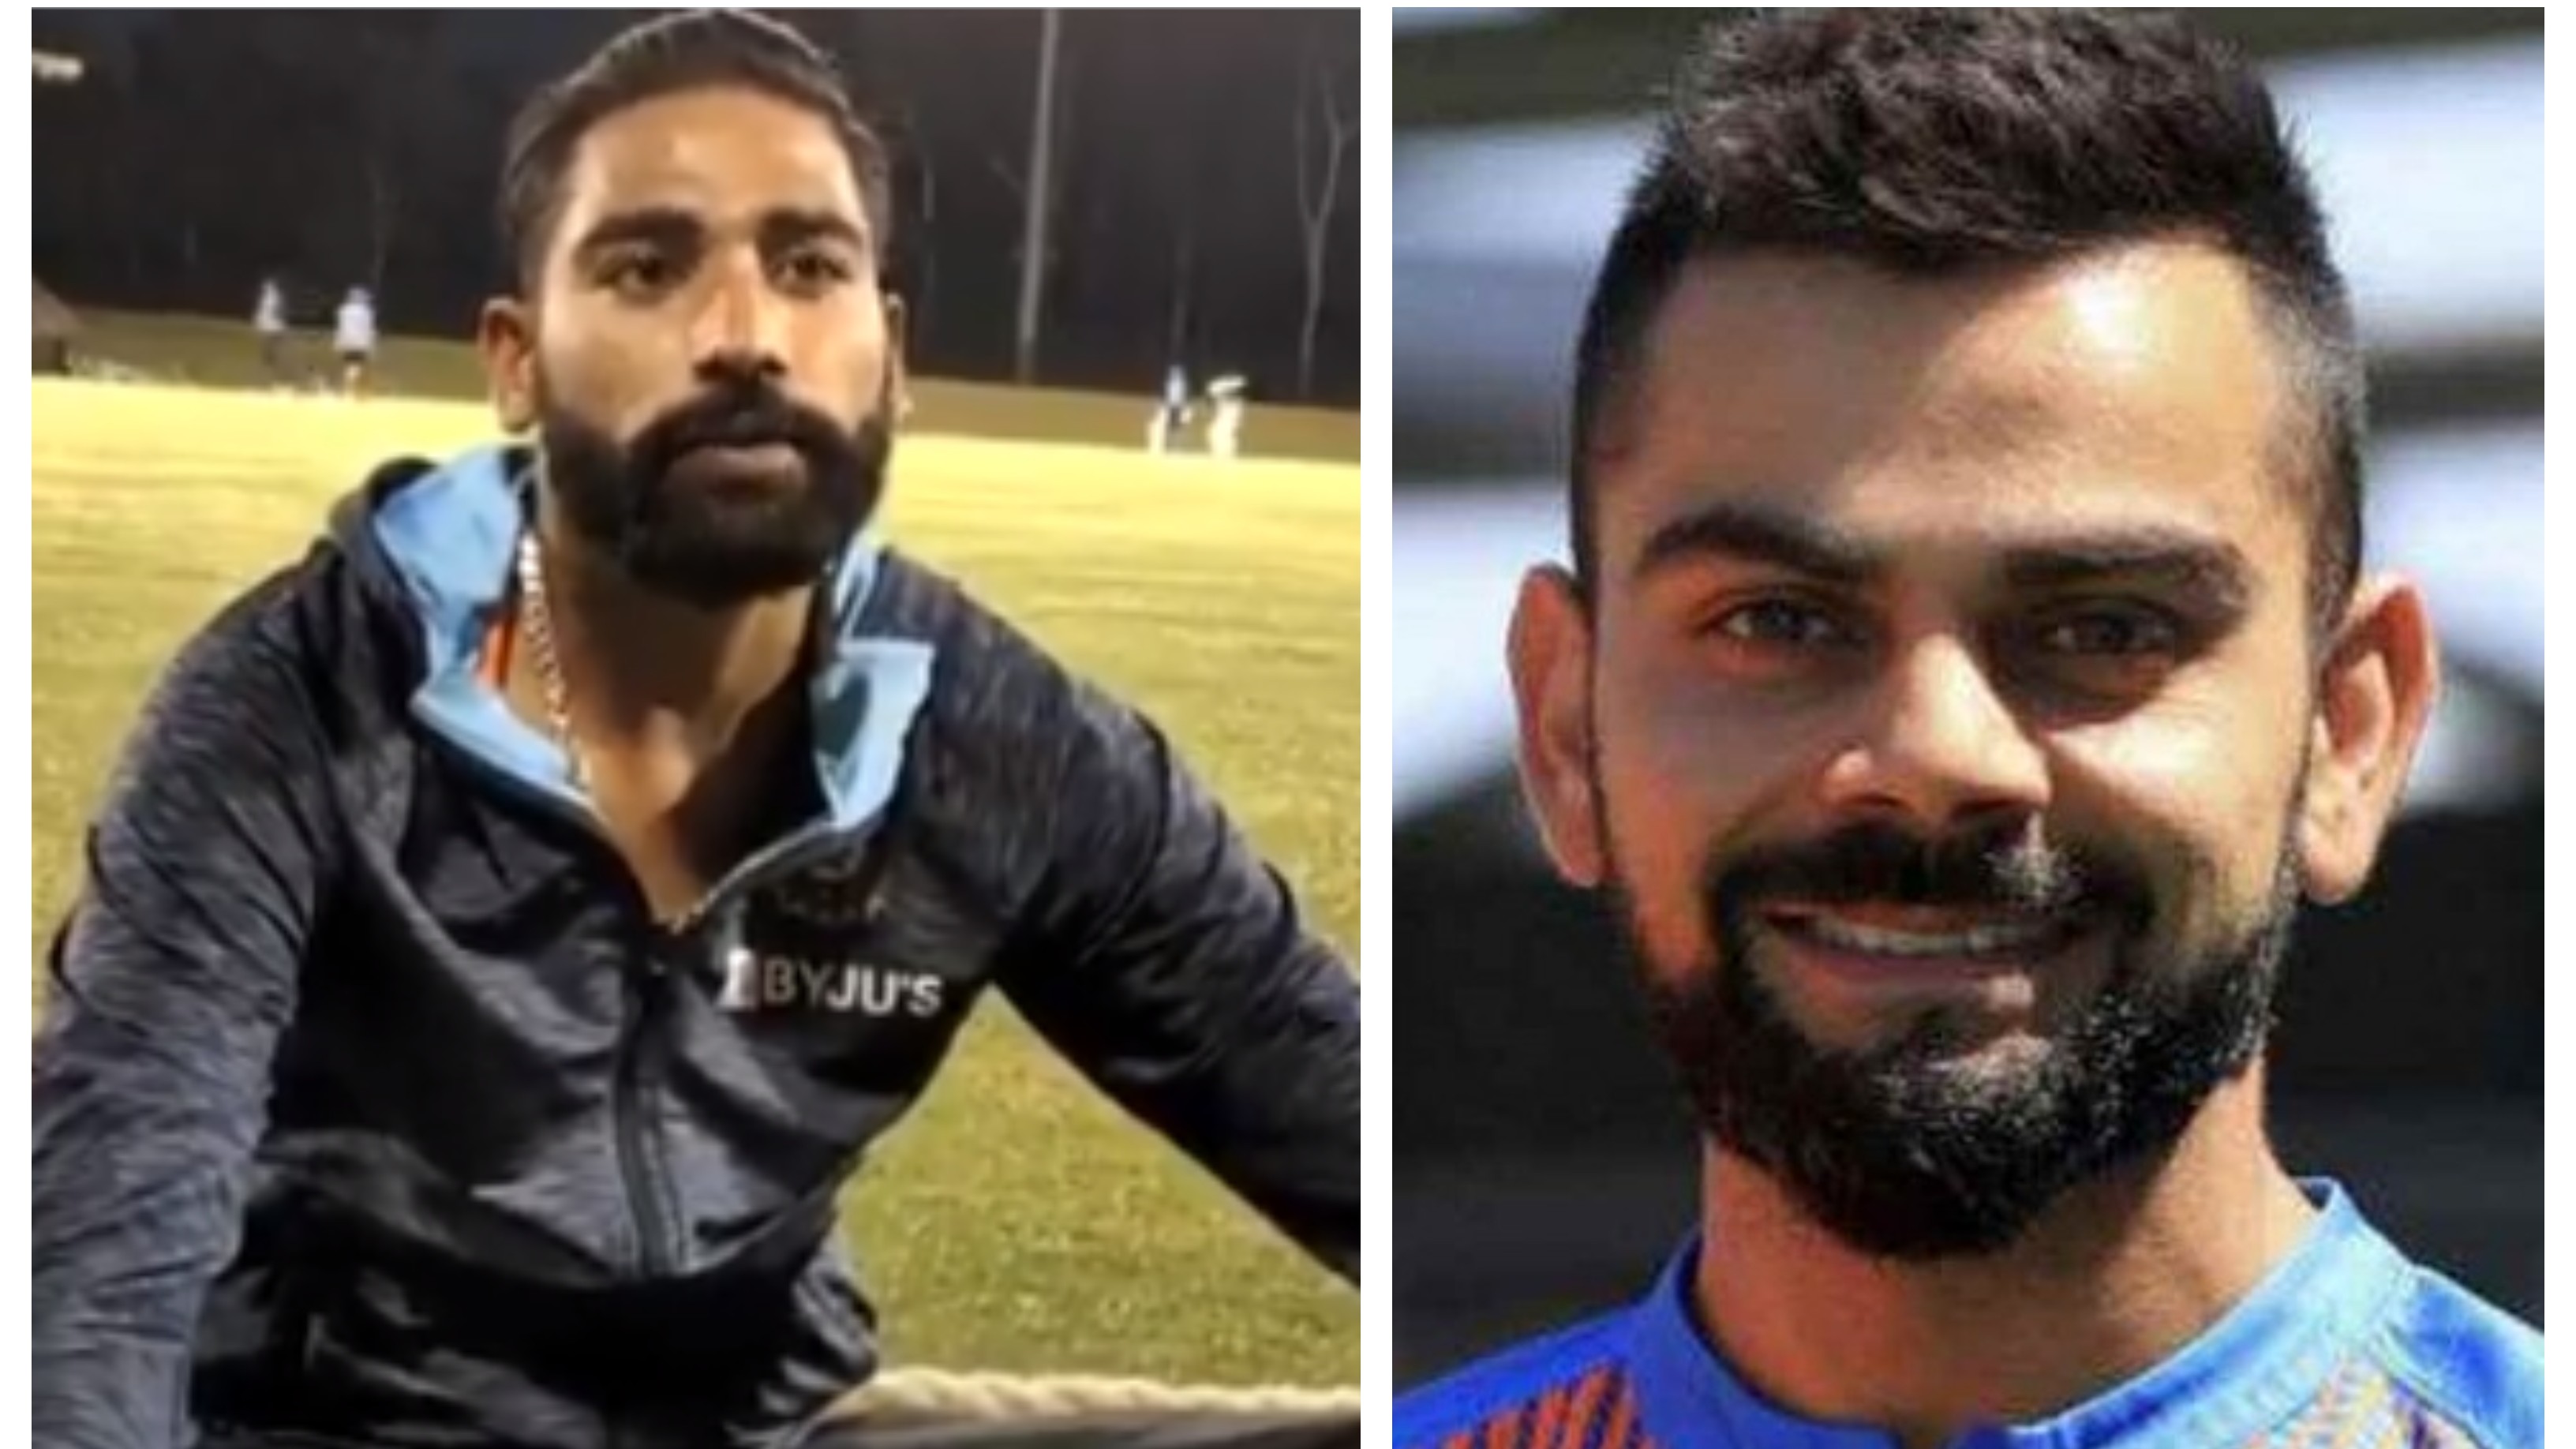 AUS v IND 2020-21: WATCH – Siraj reveals how Kohli’s positive words helped him stay afloat after his father’s demise